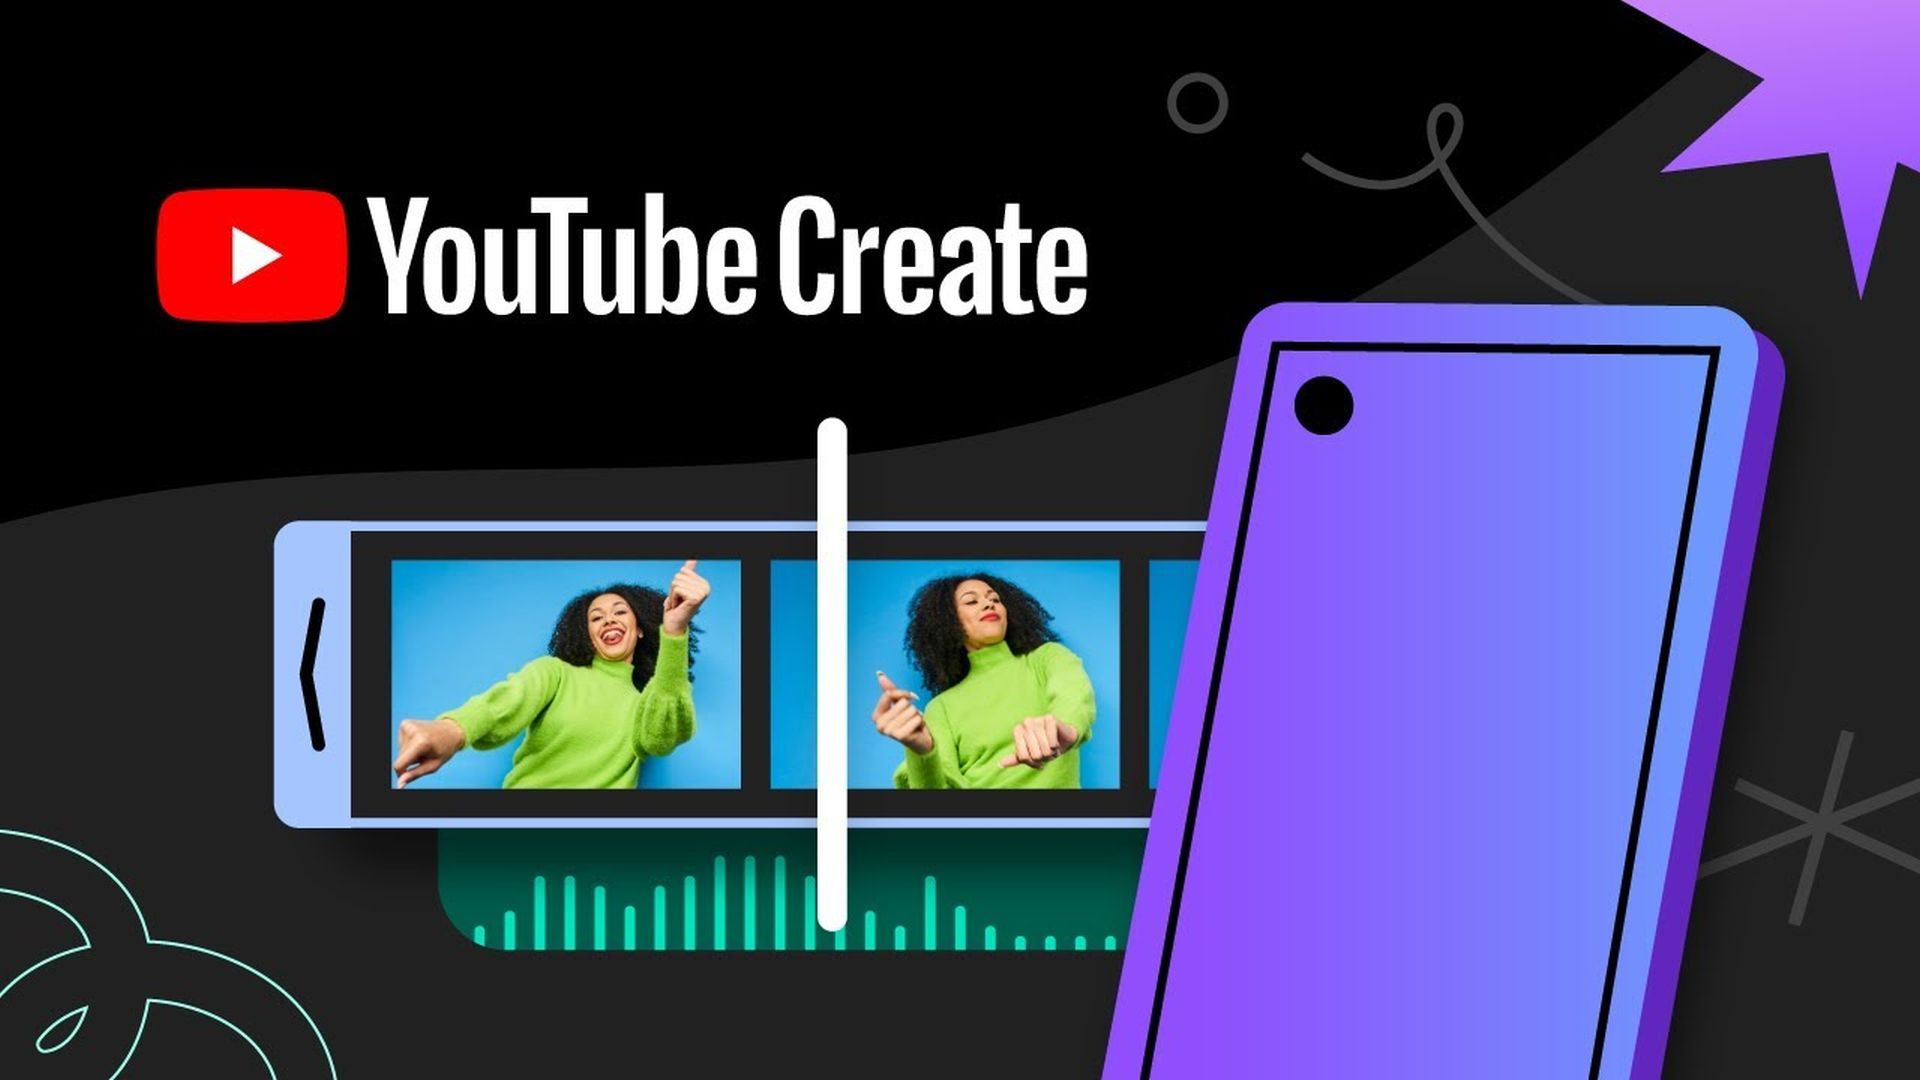 The YouTube Create logo above an image of a woman in green dancing